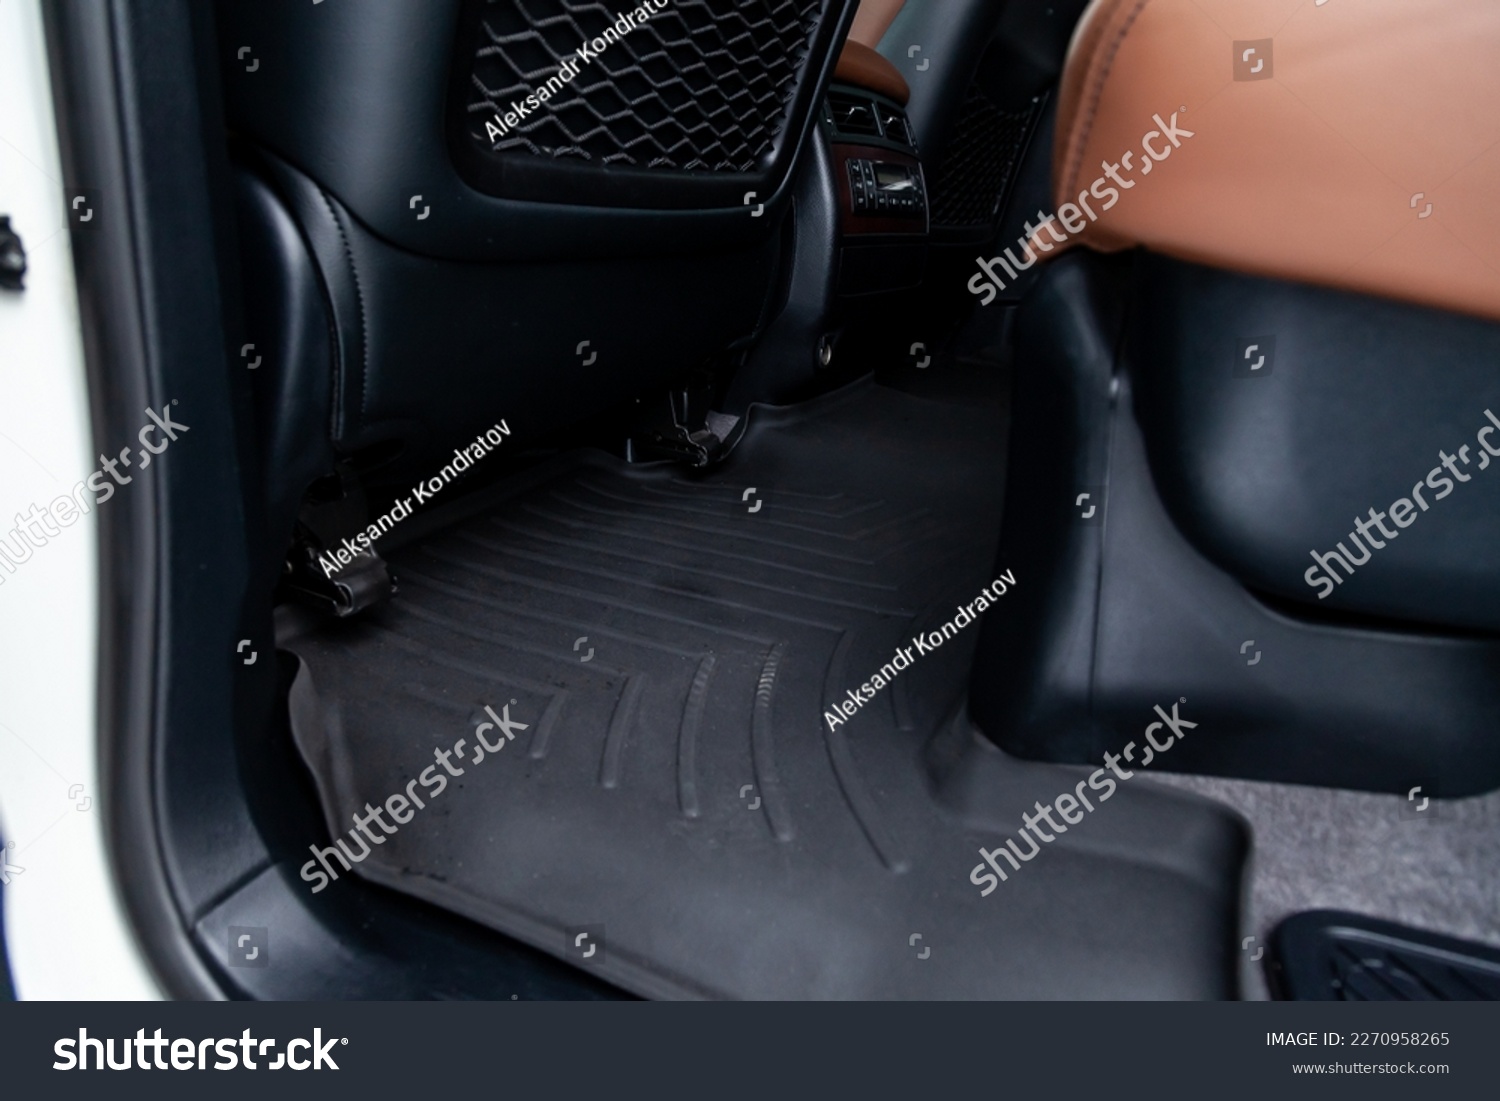 Clean car floor mats of black rubber under rear passenger seat in the workshop for the detailing vehicle dry cleaning. Auto service industry. Interior of sedan. #2270958265